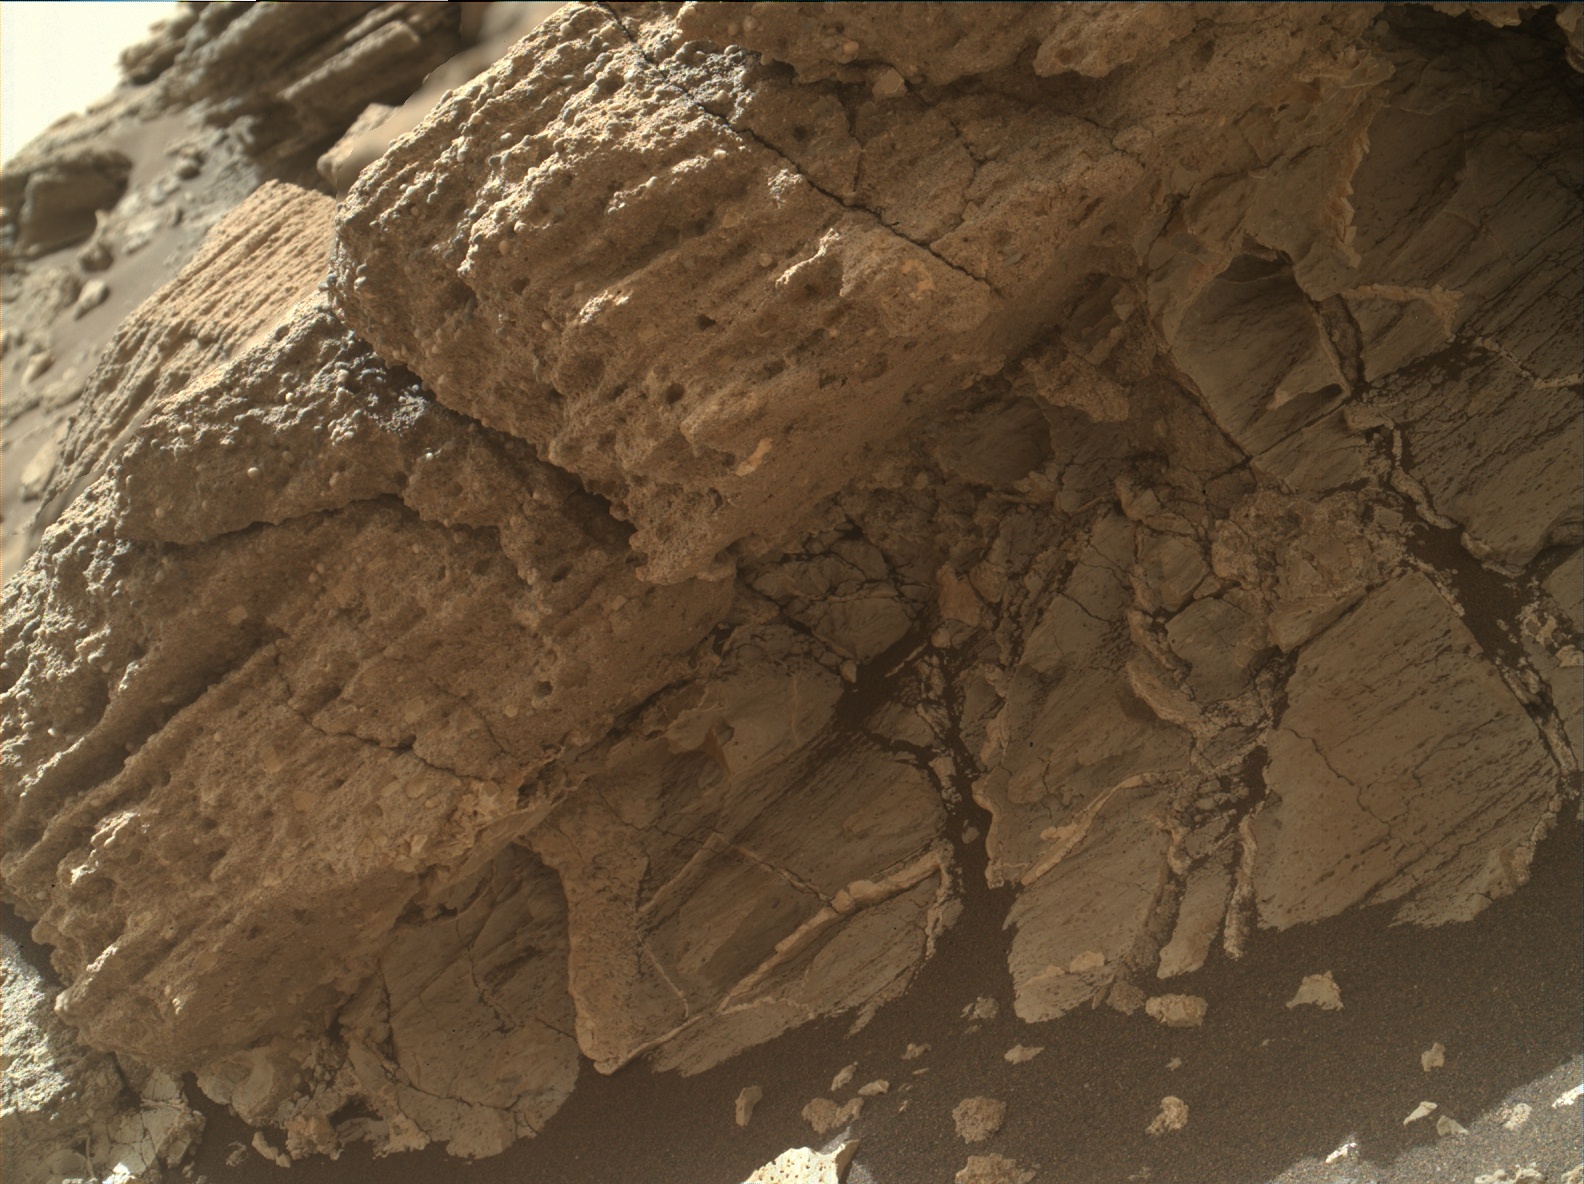 Nasa's Mars rover Curiosity acquired this image using its Mars Hand Lens Imager (MAHLI) on Sol 1031